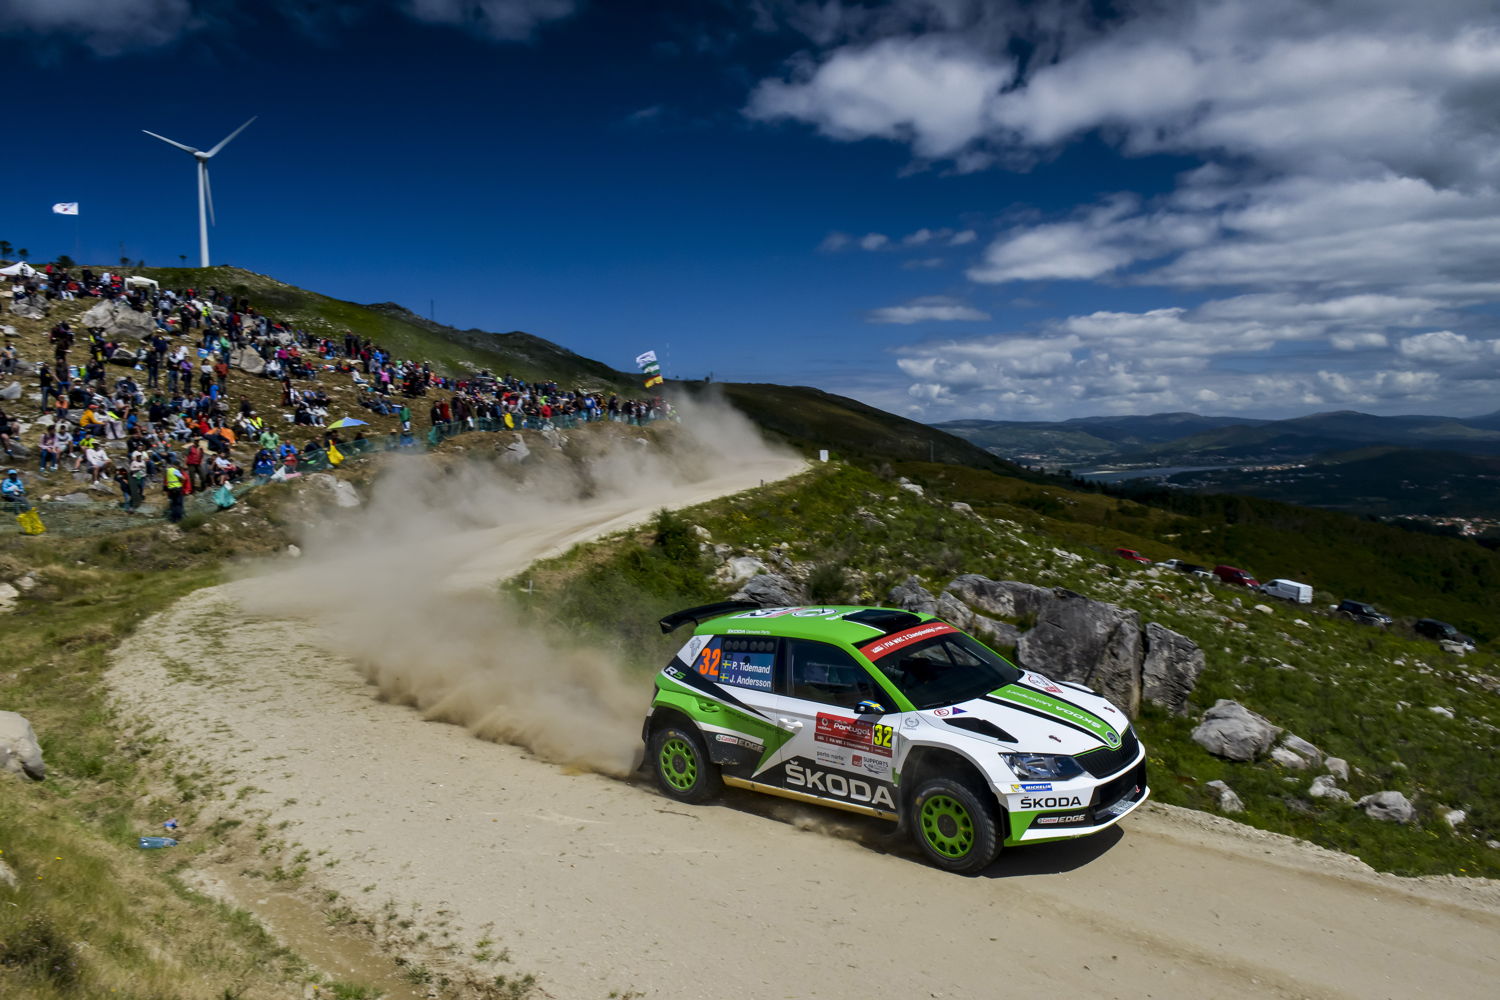 At Rally Poland Pontus Tidemand and Jonas Andersson, driving a ŠKODA FABIA R5, want to make a big step forward in their pursuit of winning the WRC 2 championship.